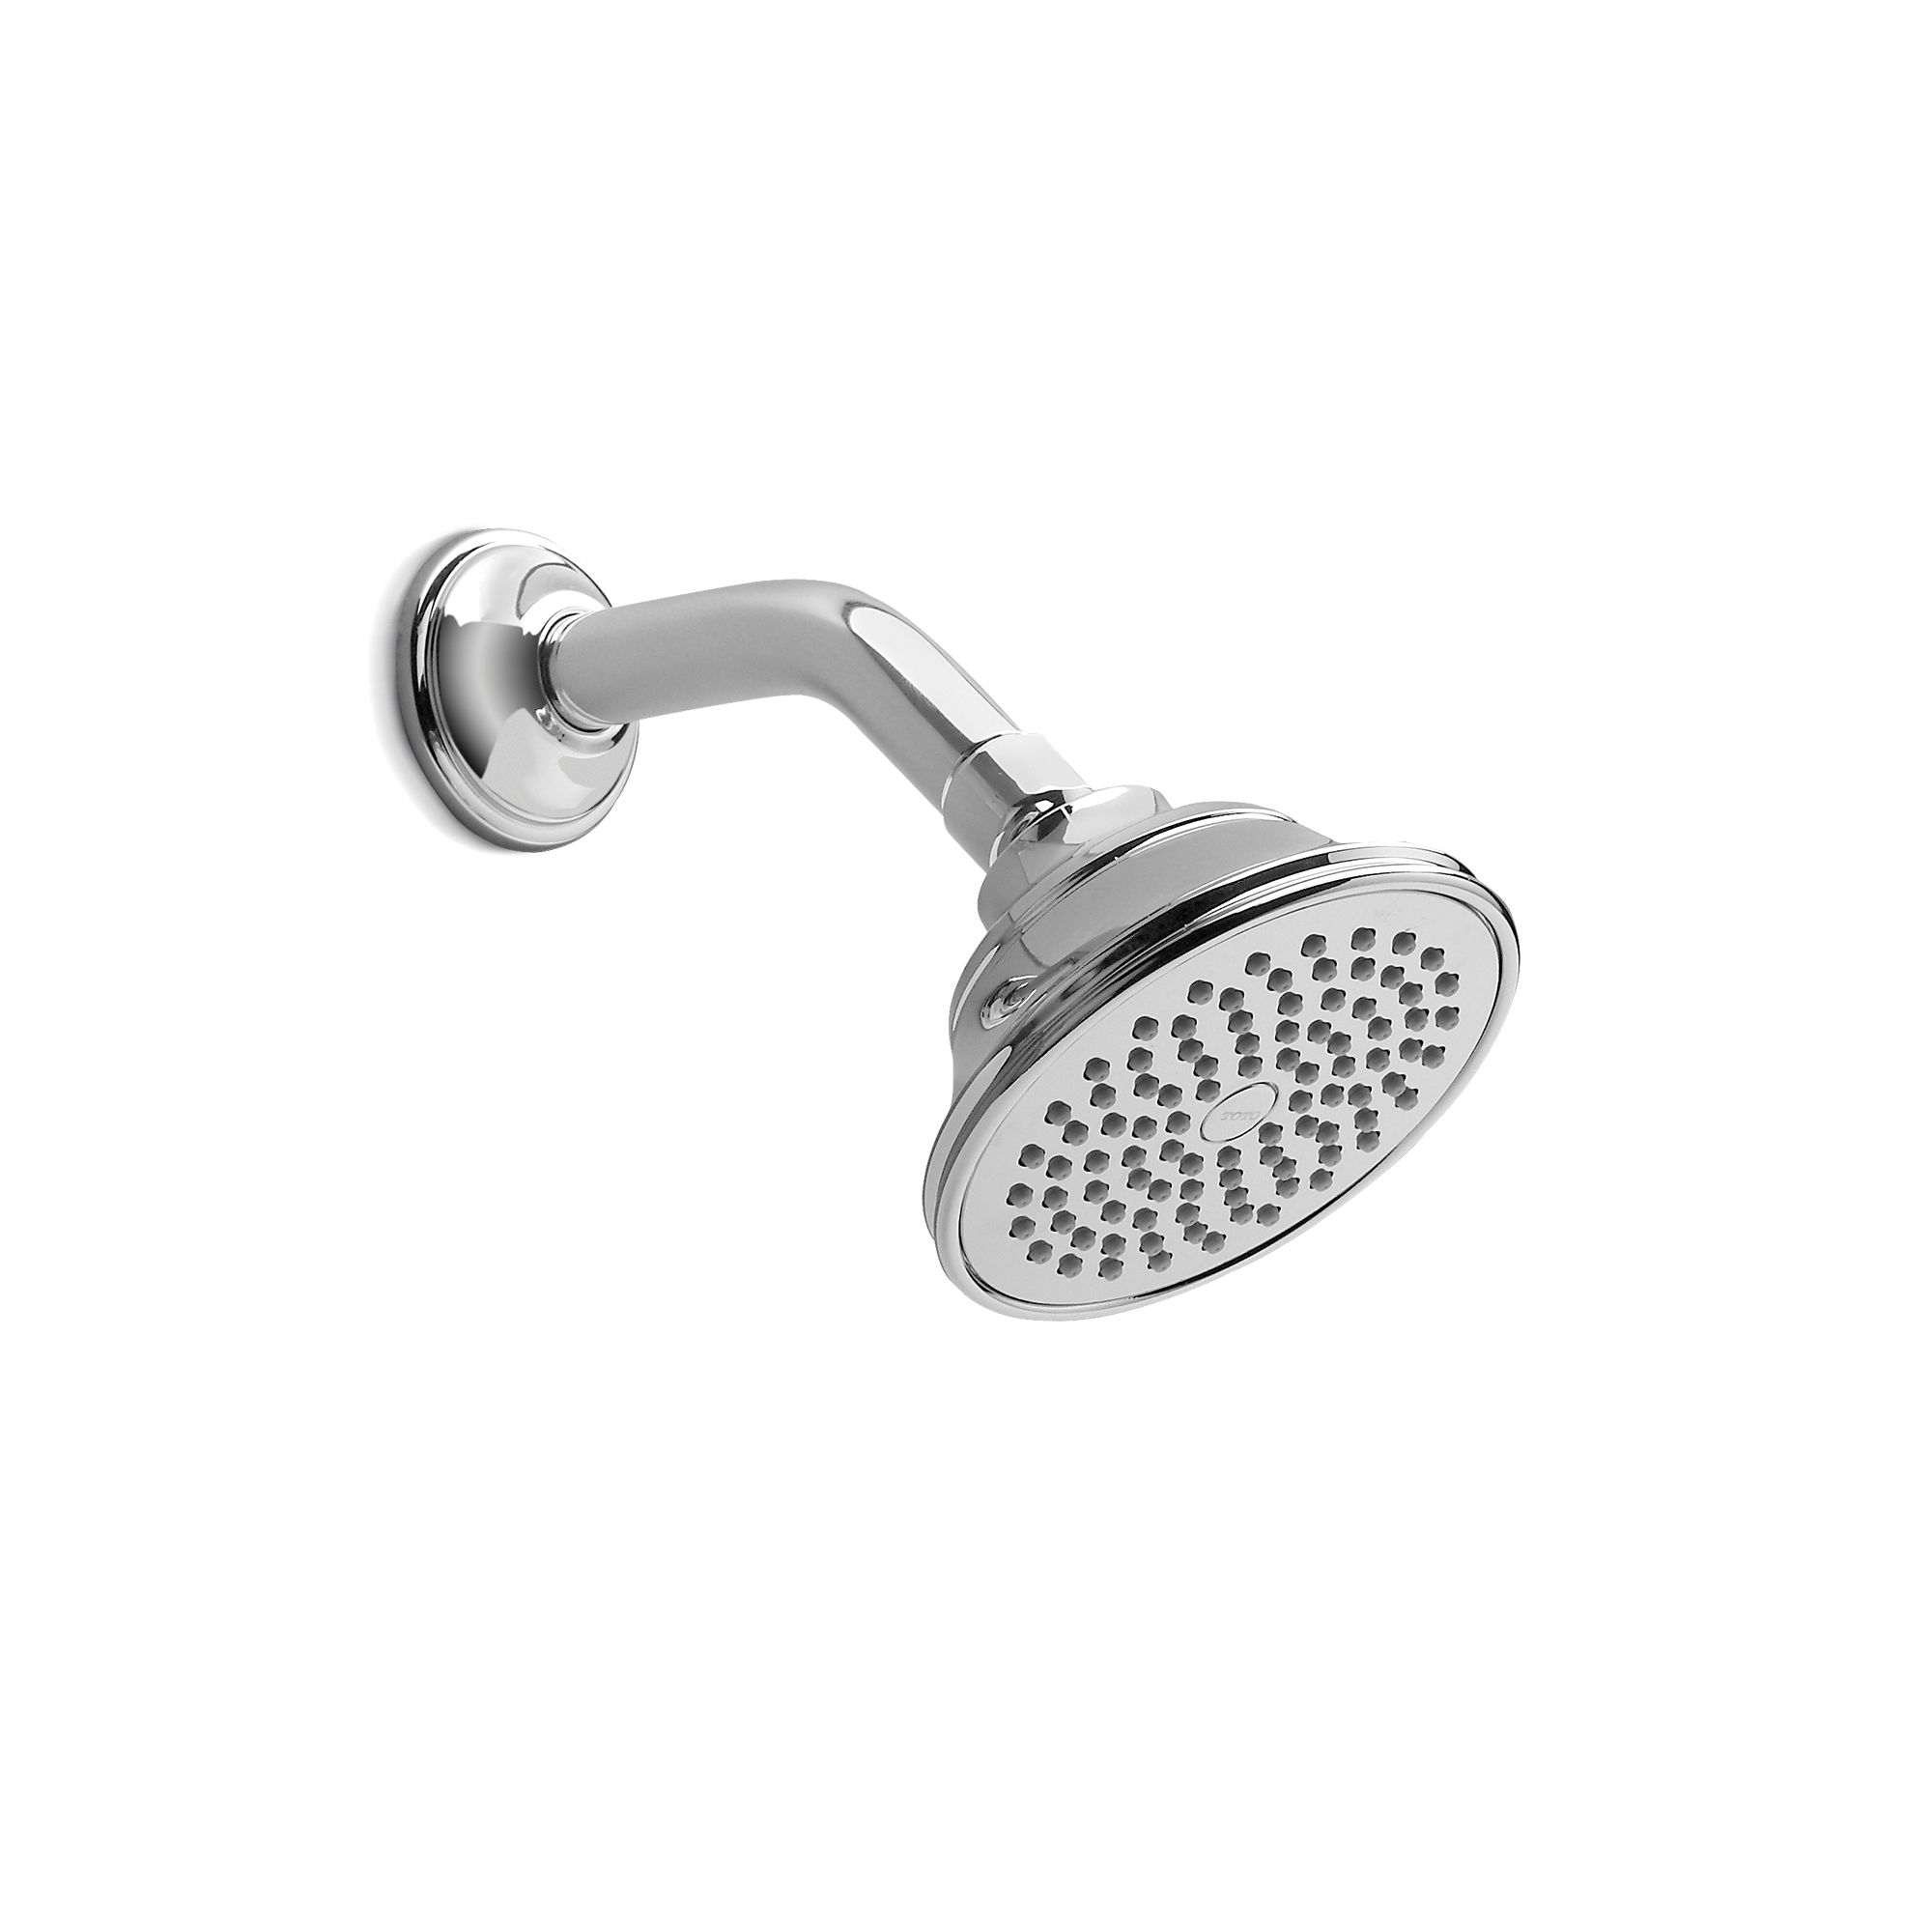 Traditional Collection Series A Single-spray Showerhead 4-1/2"